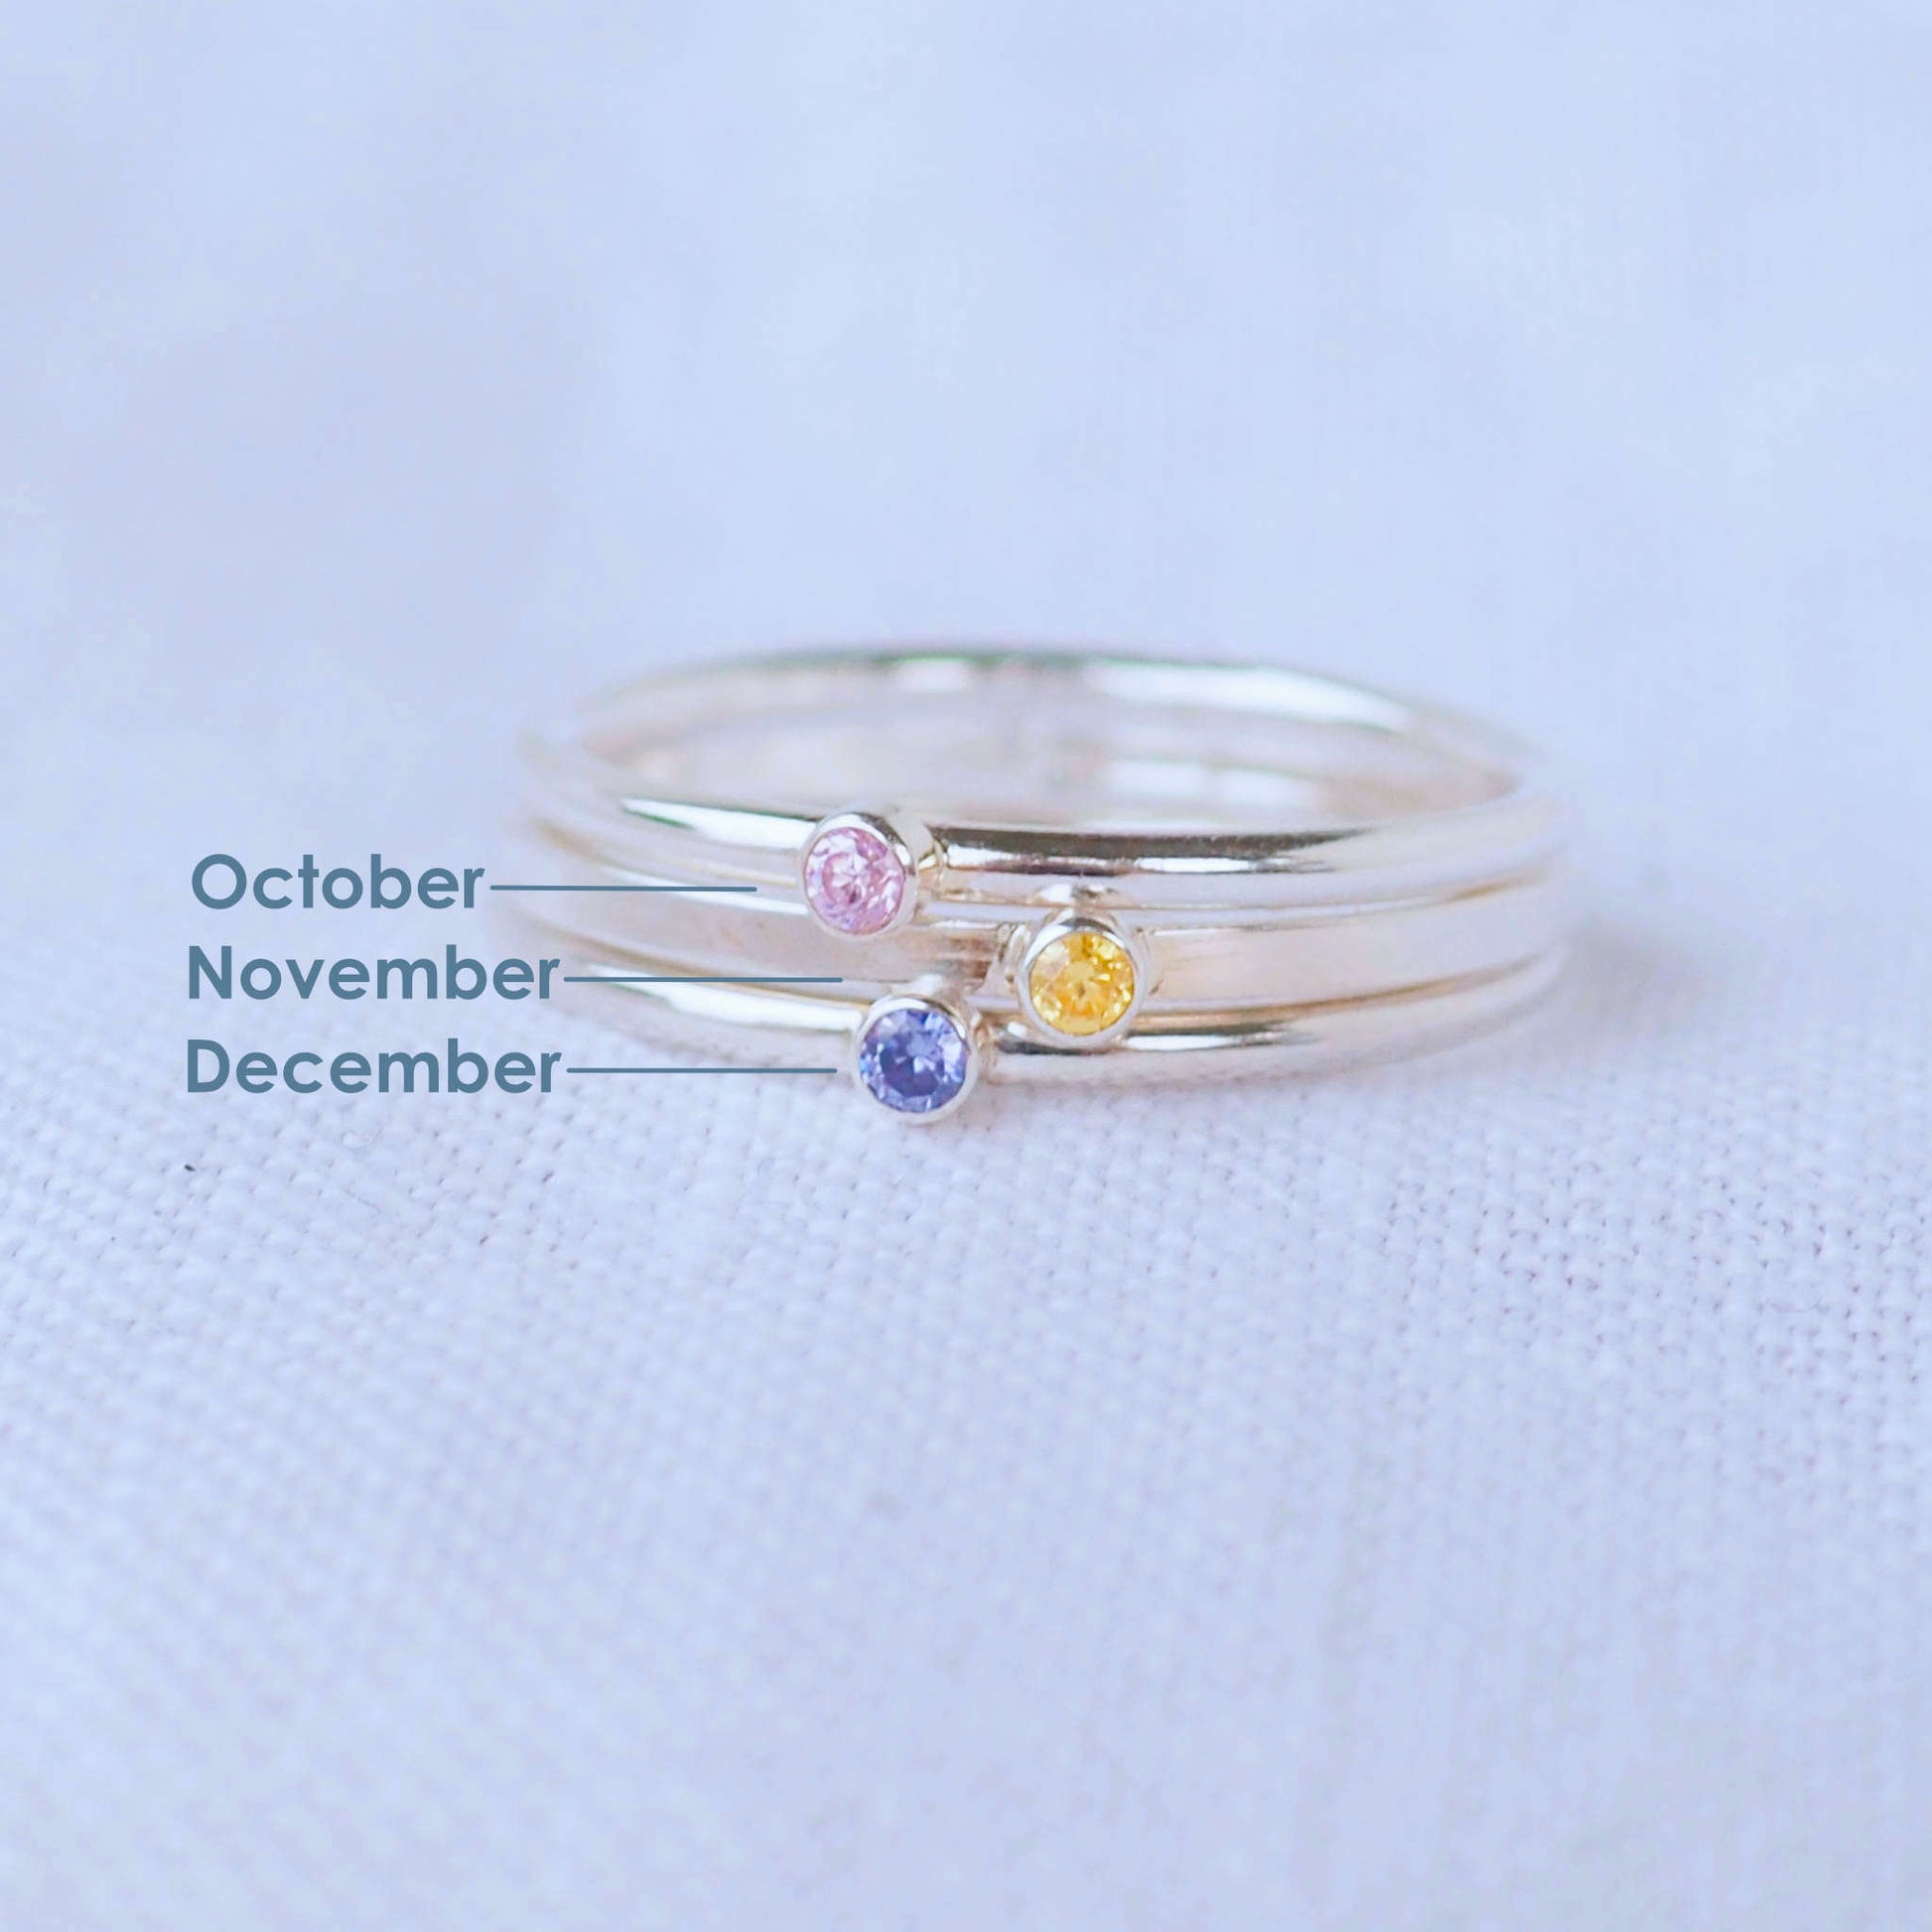 Three silver rings showing October, November and December  Birthstones. The rings are simple silver bands with a miniature birthstone on the band in pale pink, yellow and violet cubic zirconia. Handmade in Edinburgh by maram jewellery